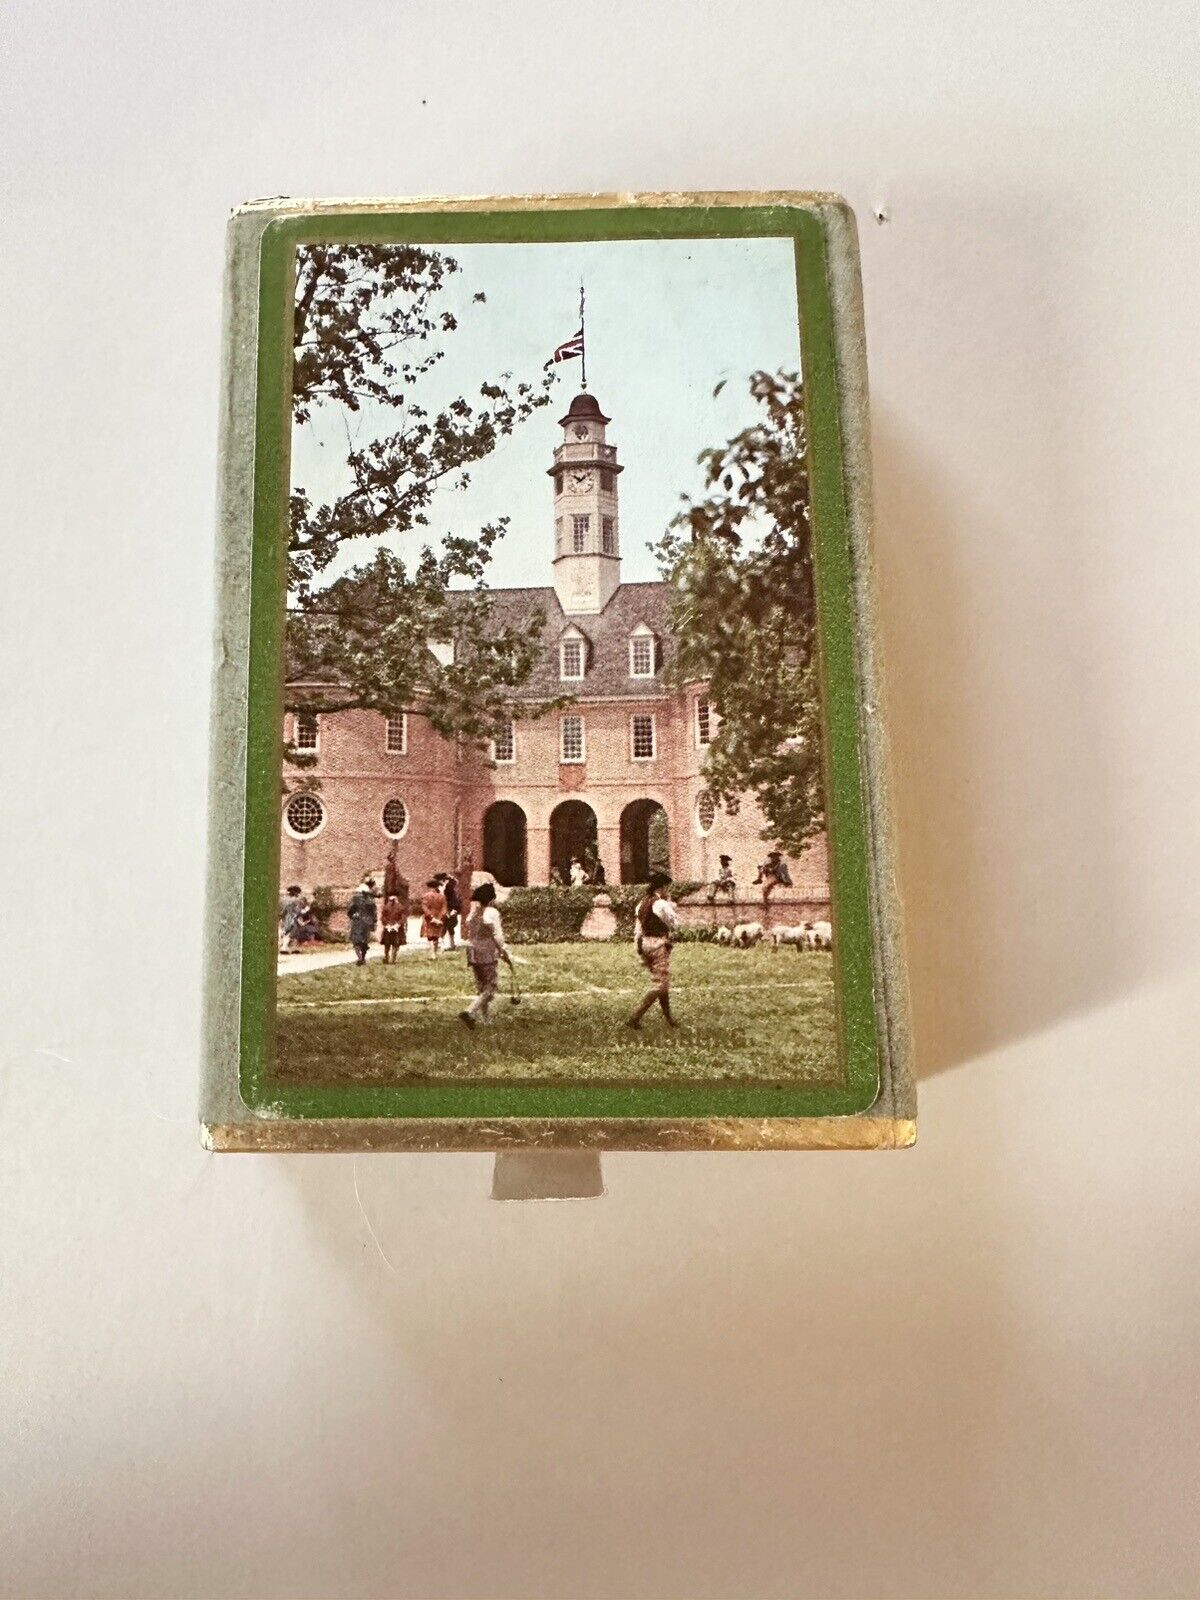 Vintage Congress Playing Deck Cards. The capital Williamsburg VA.